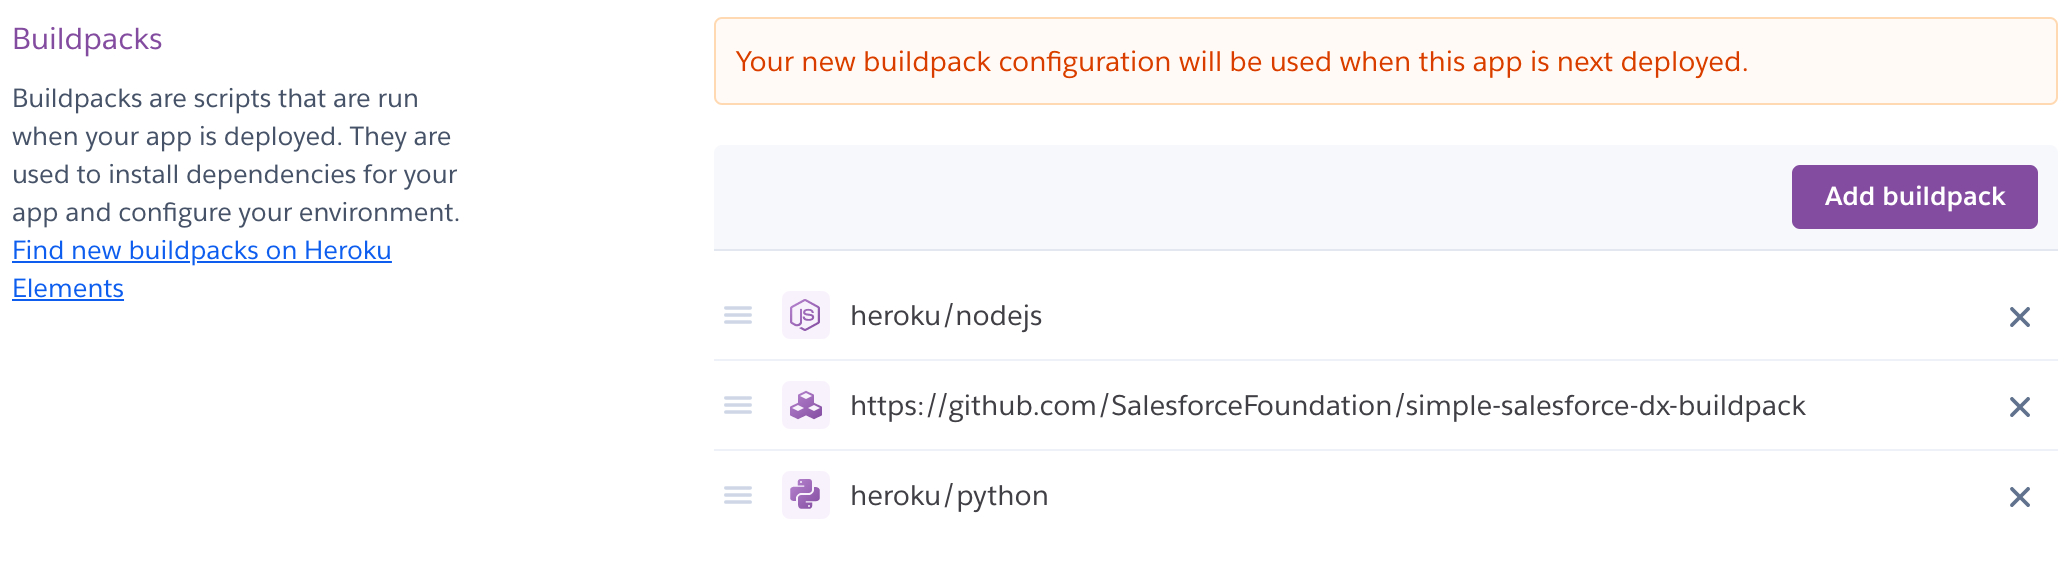 Buildpack configuration